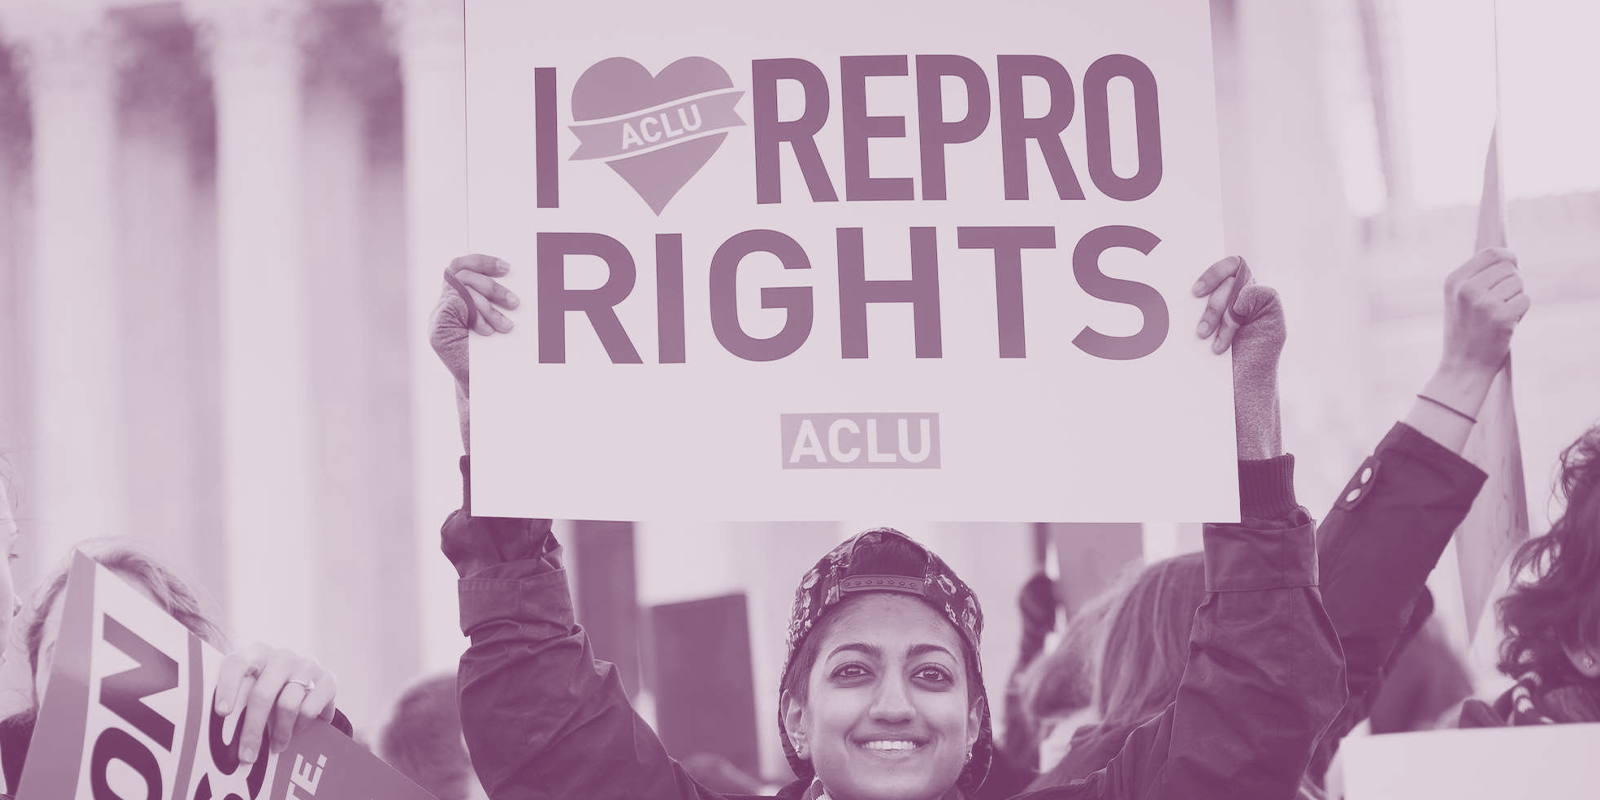 image of a person holding a sign that reads, "I love repro rights."